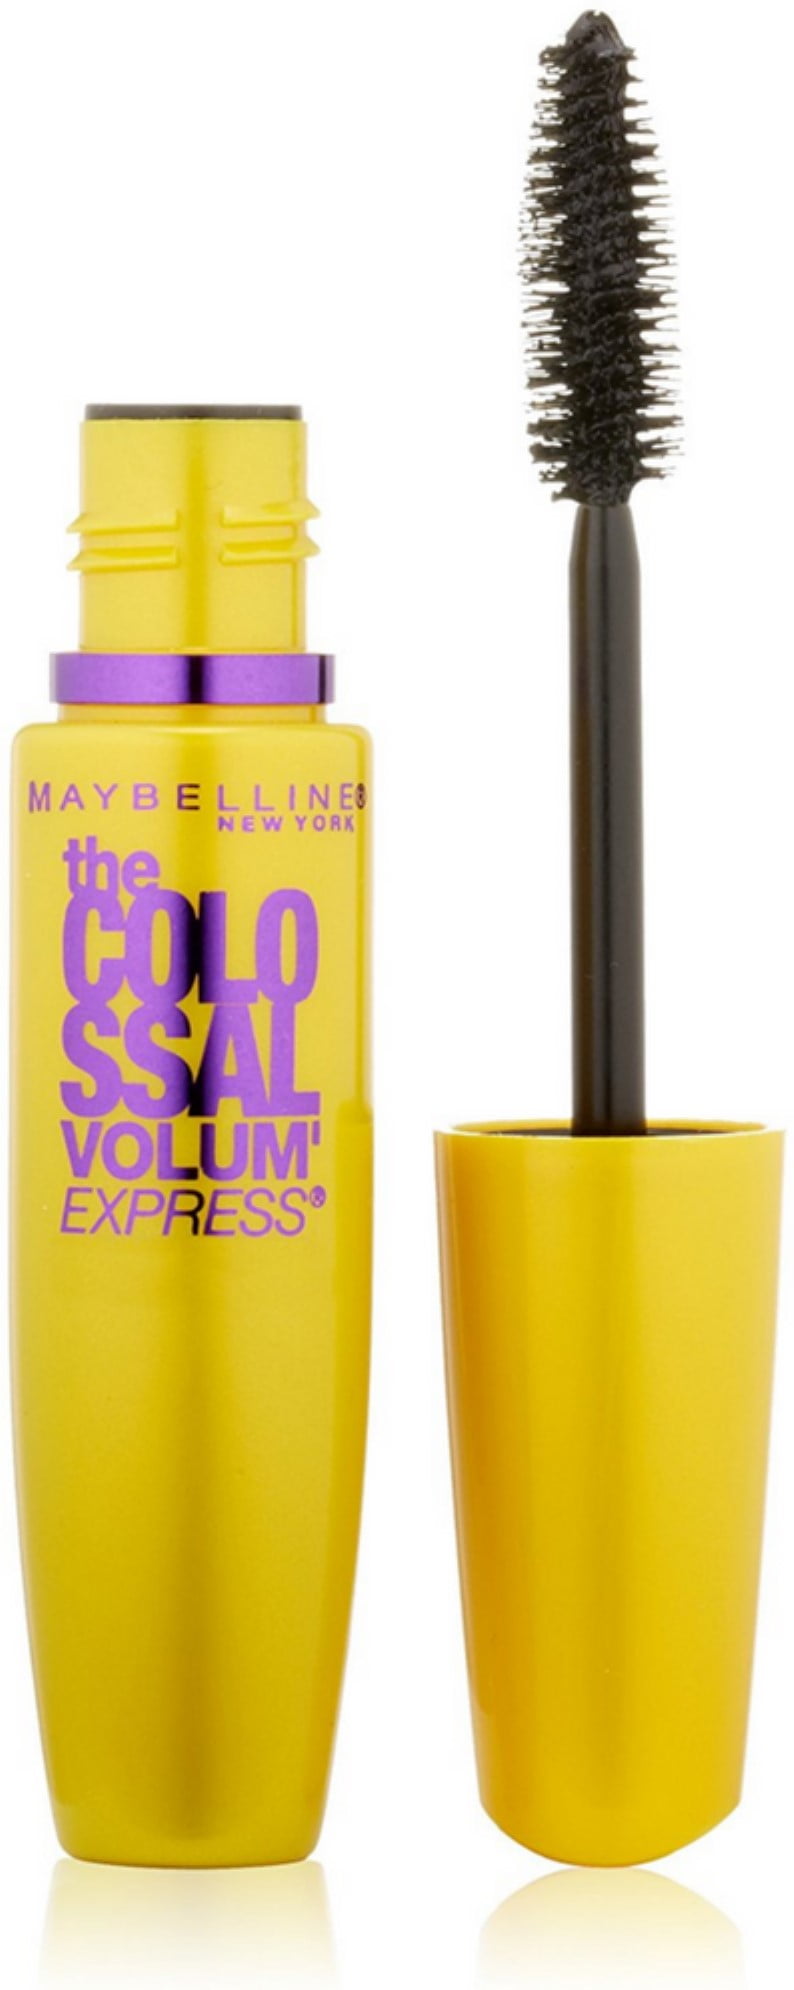 Express Volum\' Mascara, Each 1 [231] Classic Colossal Maybelline The Black